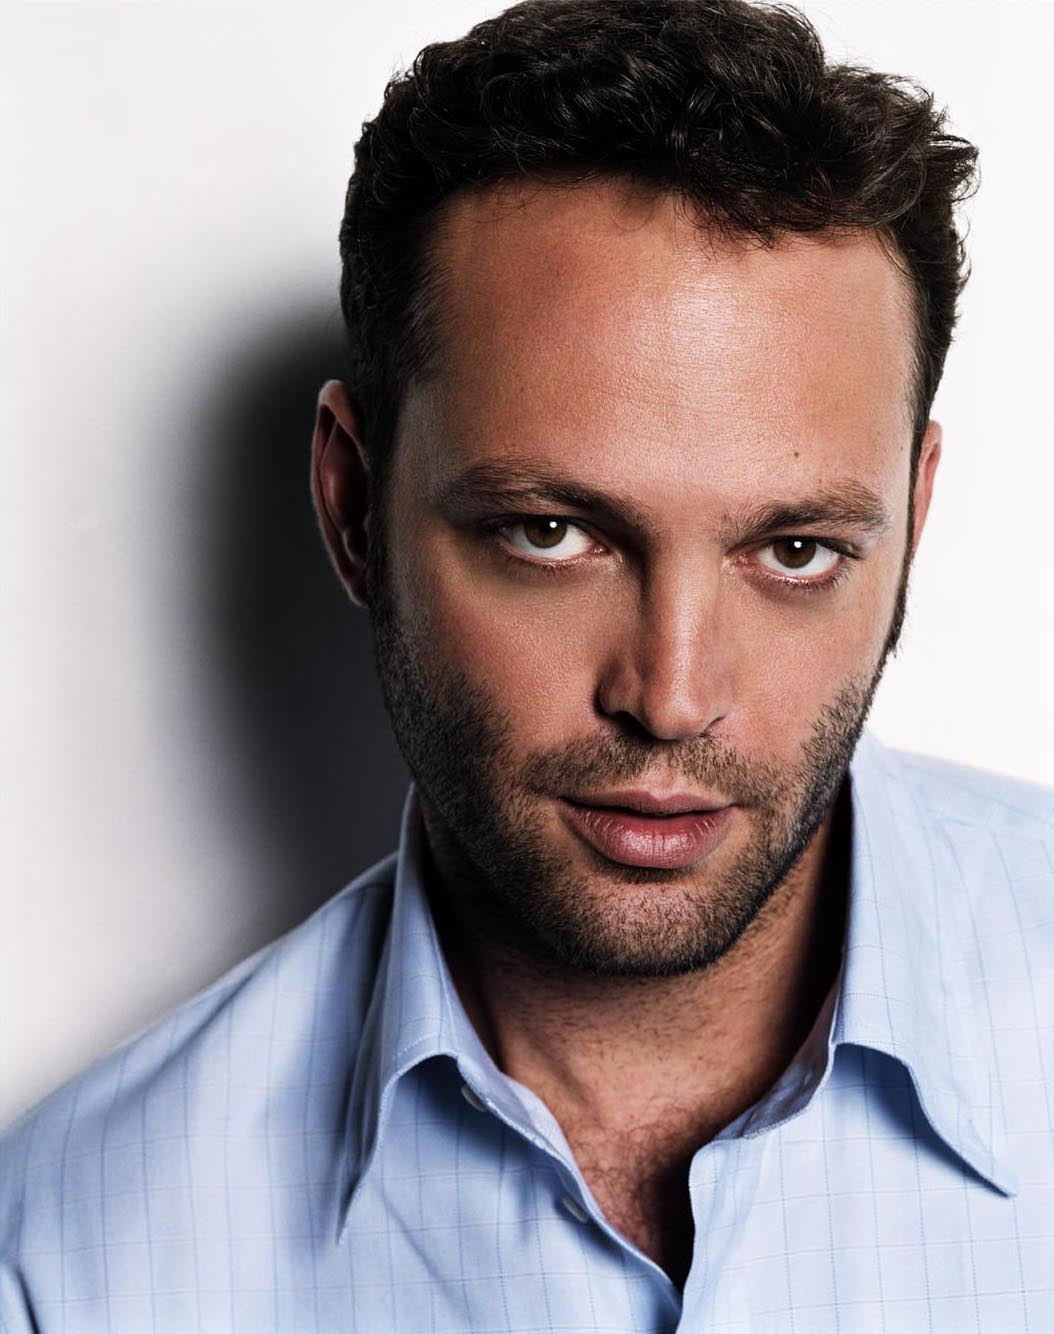 Vince Vaughn and Director Justin Lin Confirmed for ‘True Detective